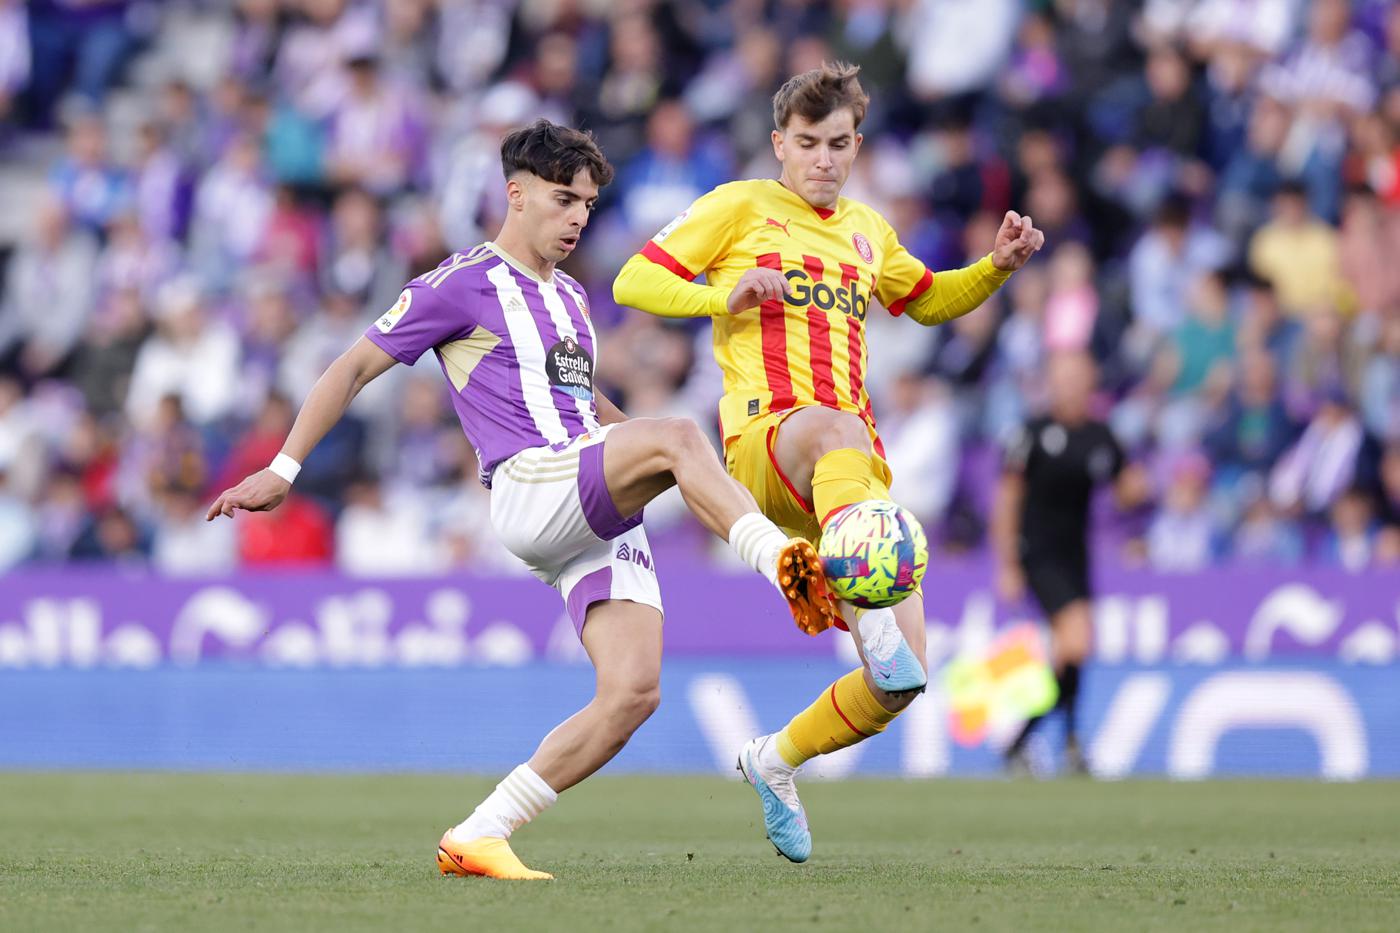 Valladolid - Girona: where to watch, live broadcast (April 22)